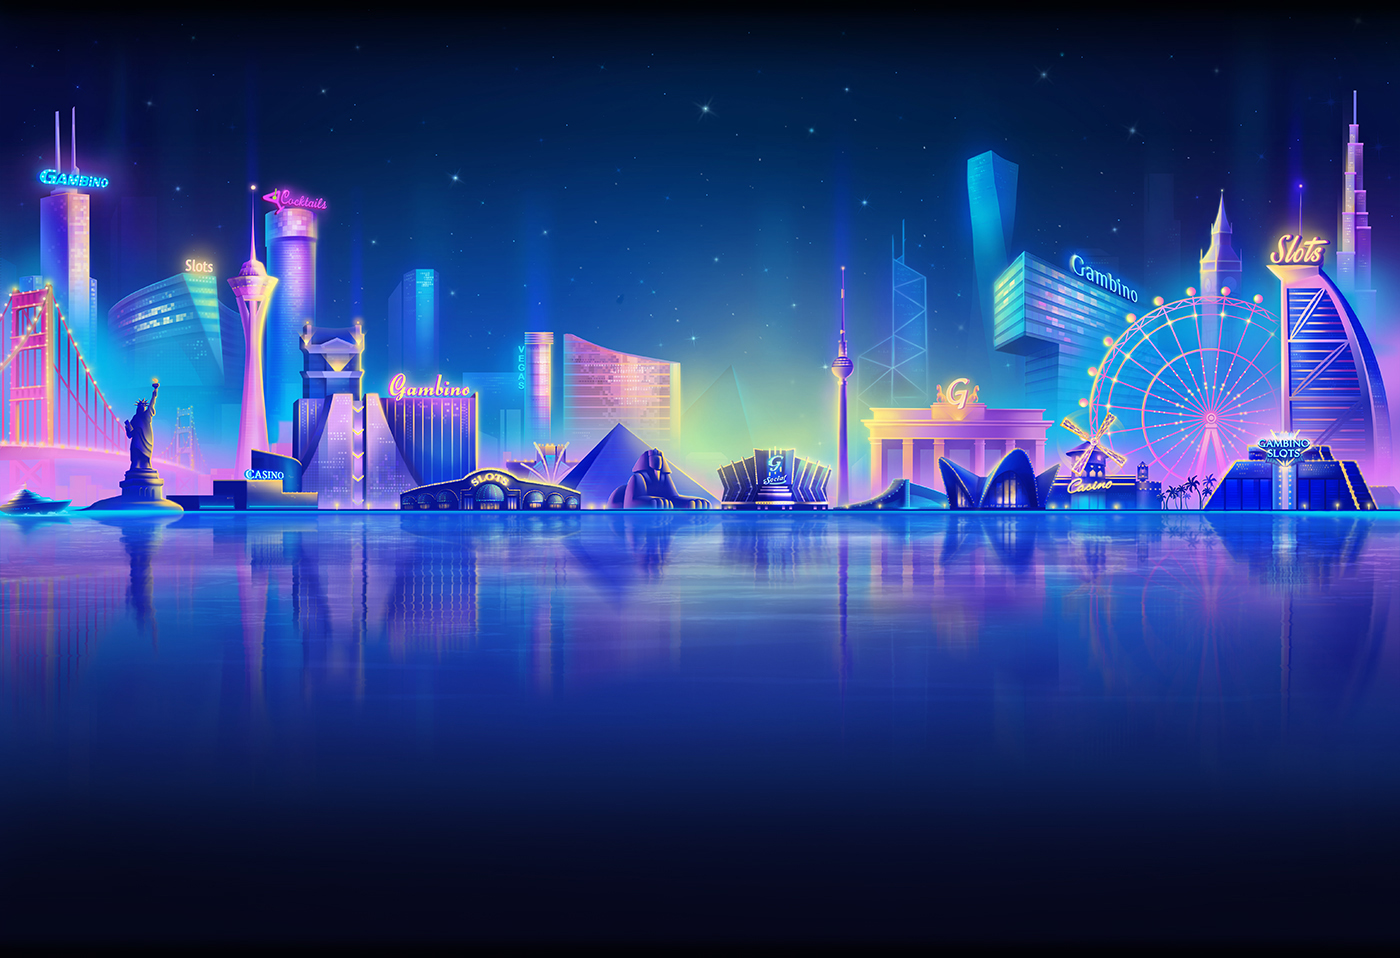 Lobby background for Gambino slots on Behance